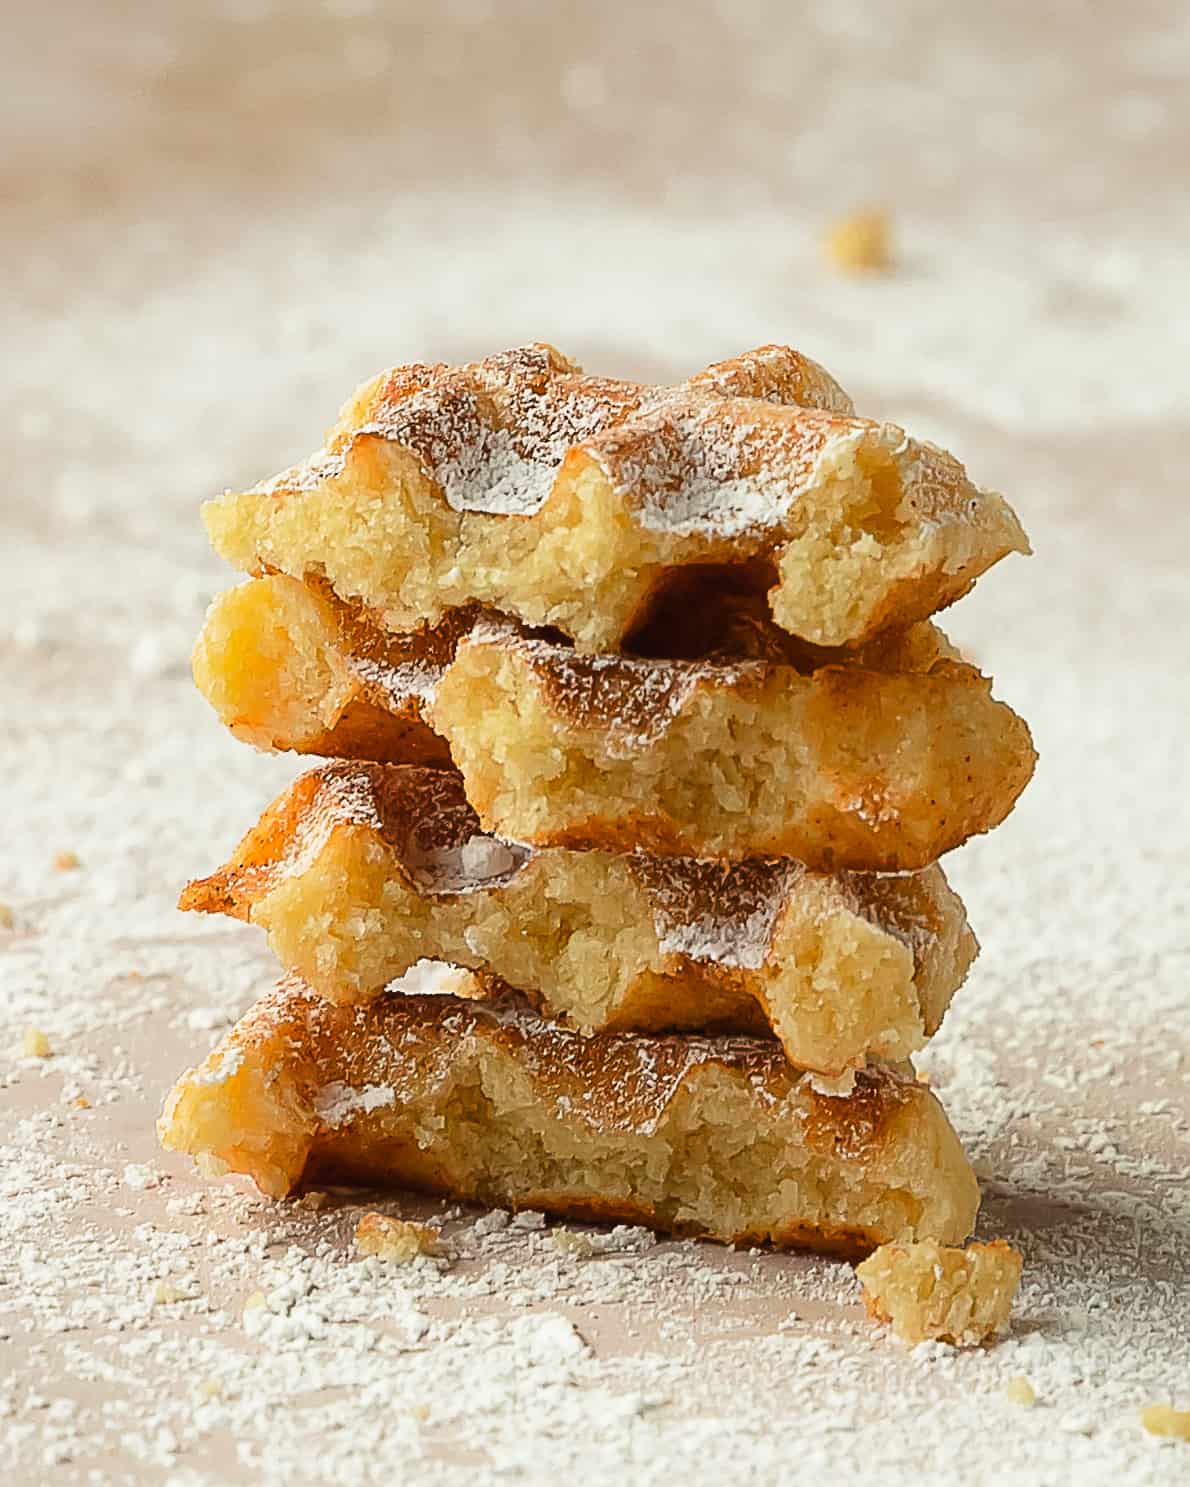 Waffle cookies area classic buttery vanilla sugar cookie cooked on a waffle iron. These easy cookie waffles have a soft buttery interior with a crisp golden brown exterior. 